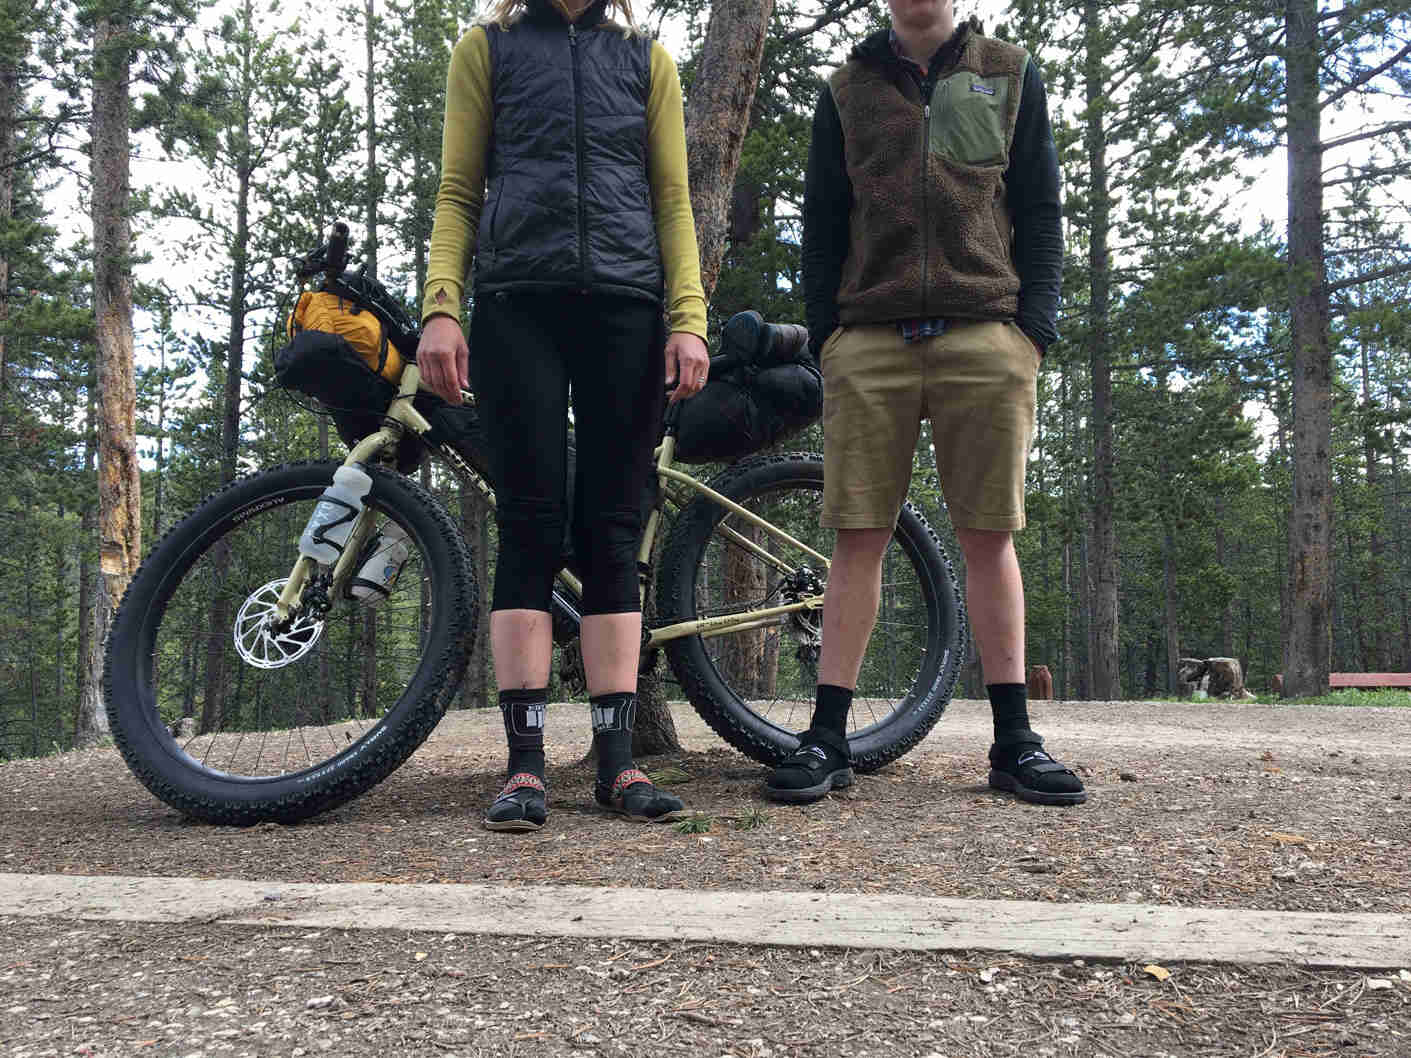 Two cyclists standing in front of a Surly ECR bike, on gravel, with pines trees in the background